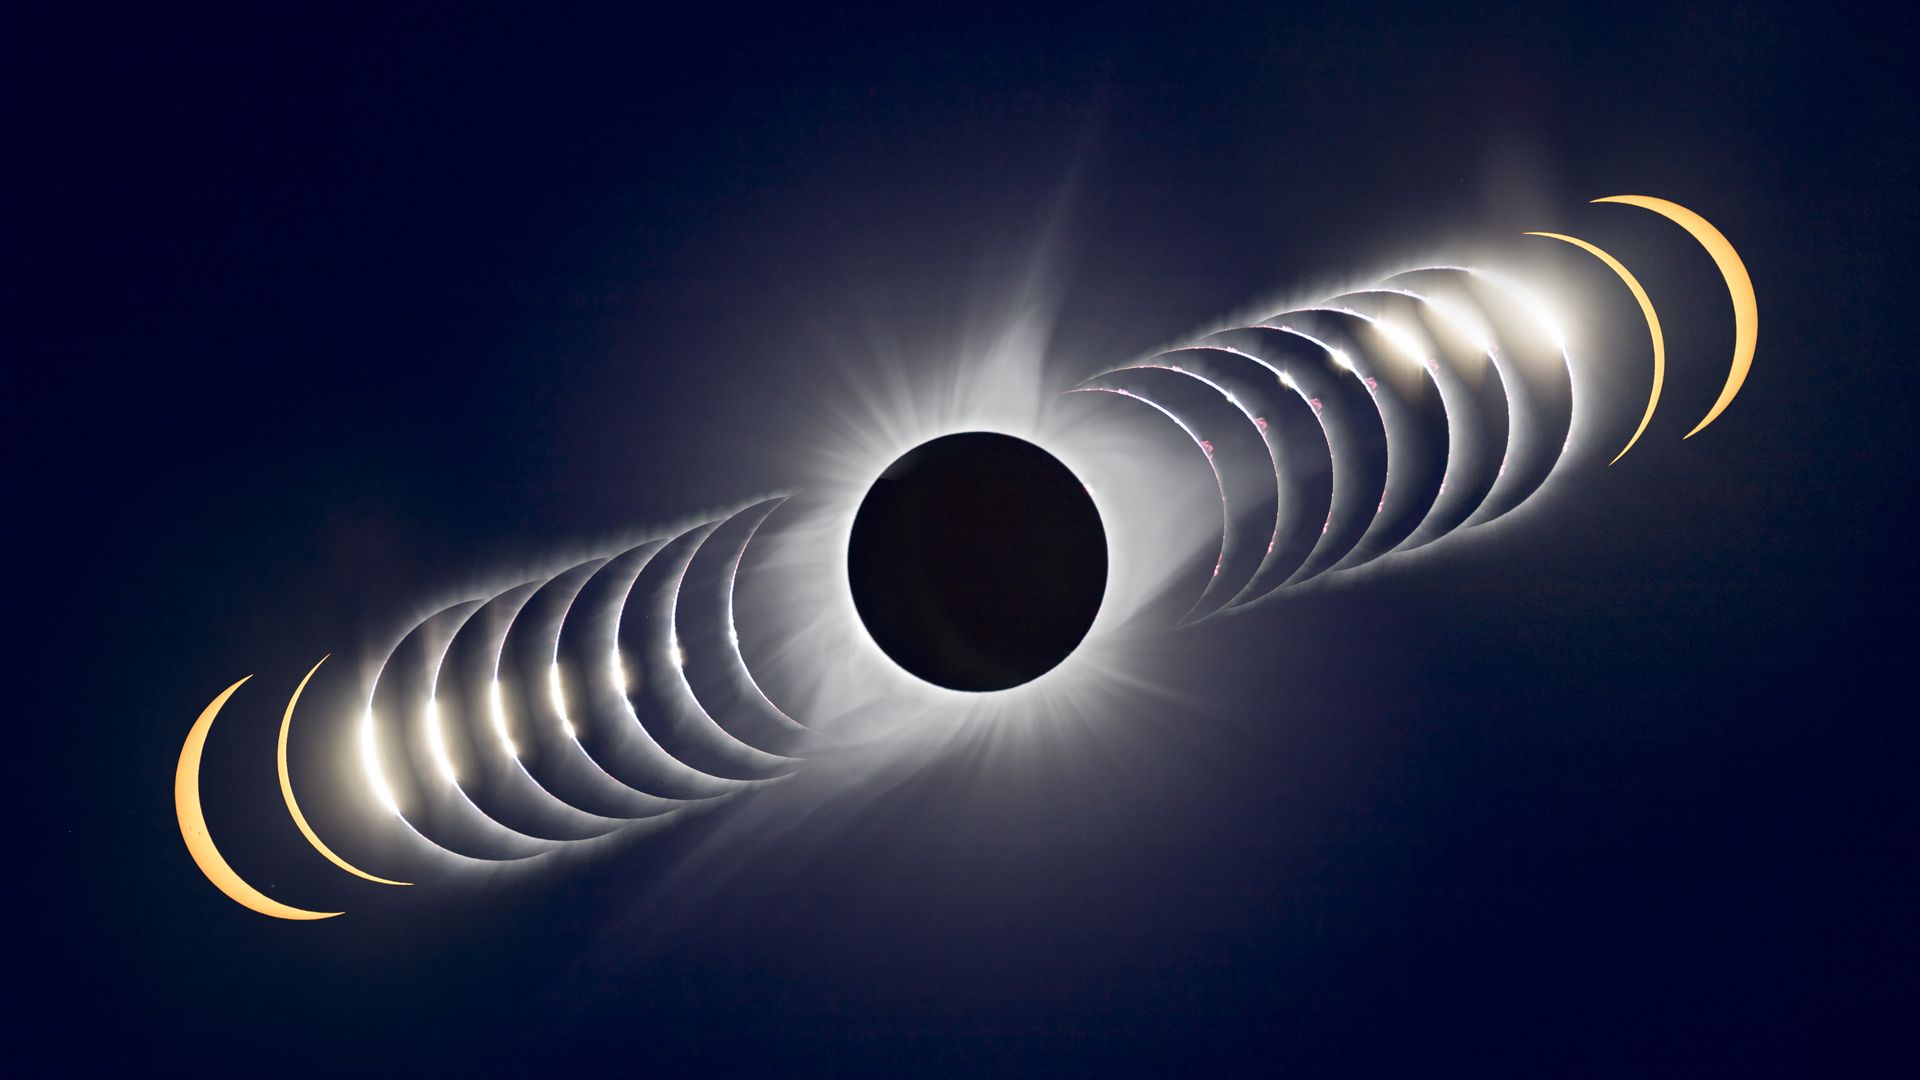 A time sequence composite of a solar eclipse